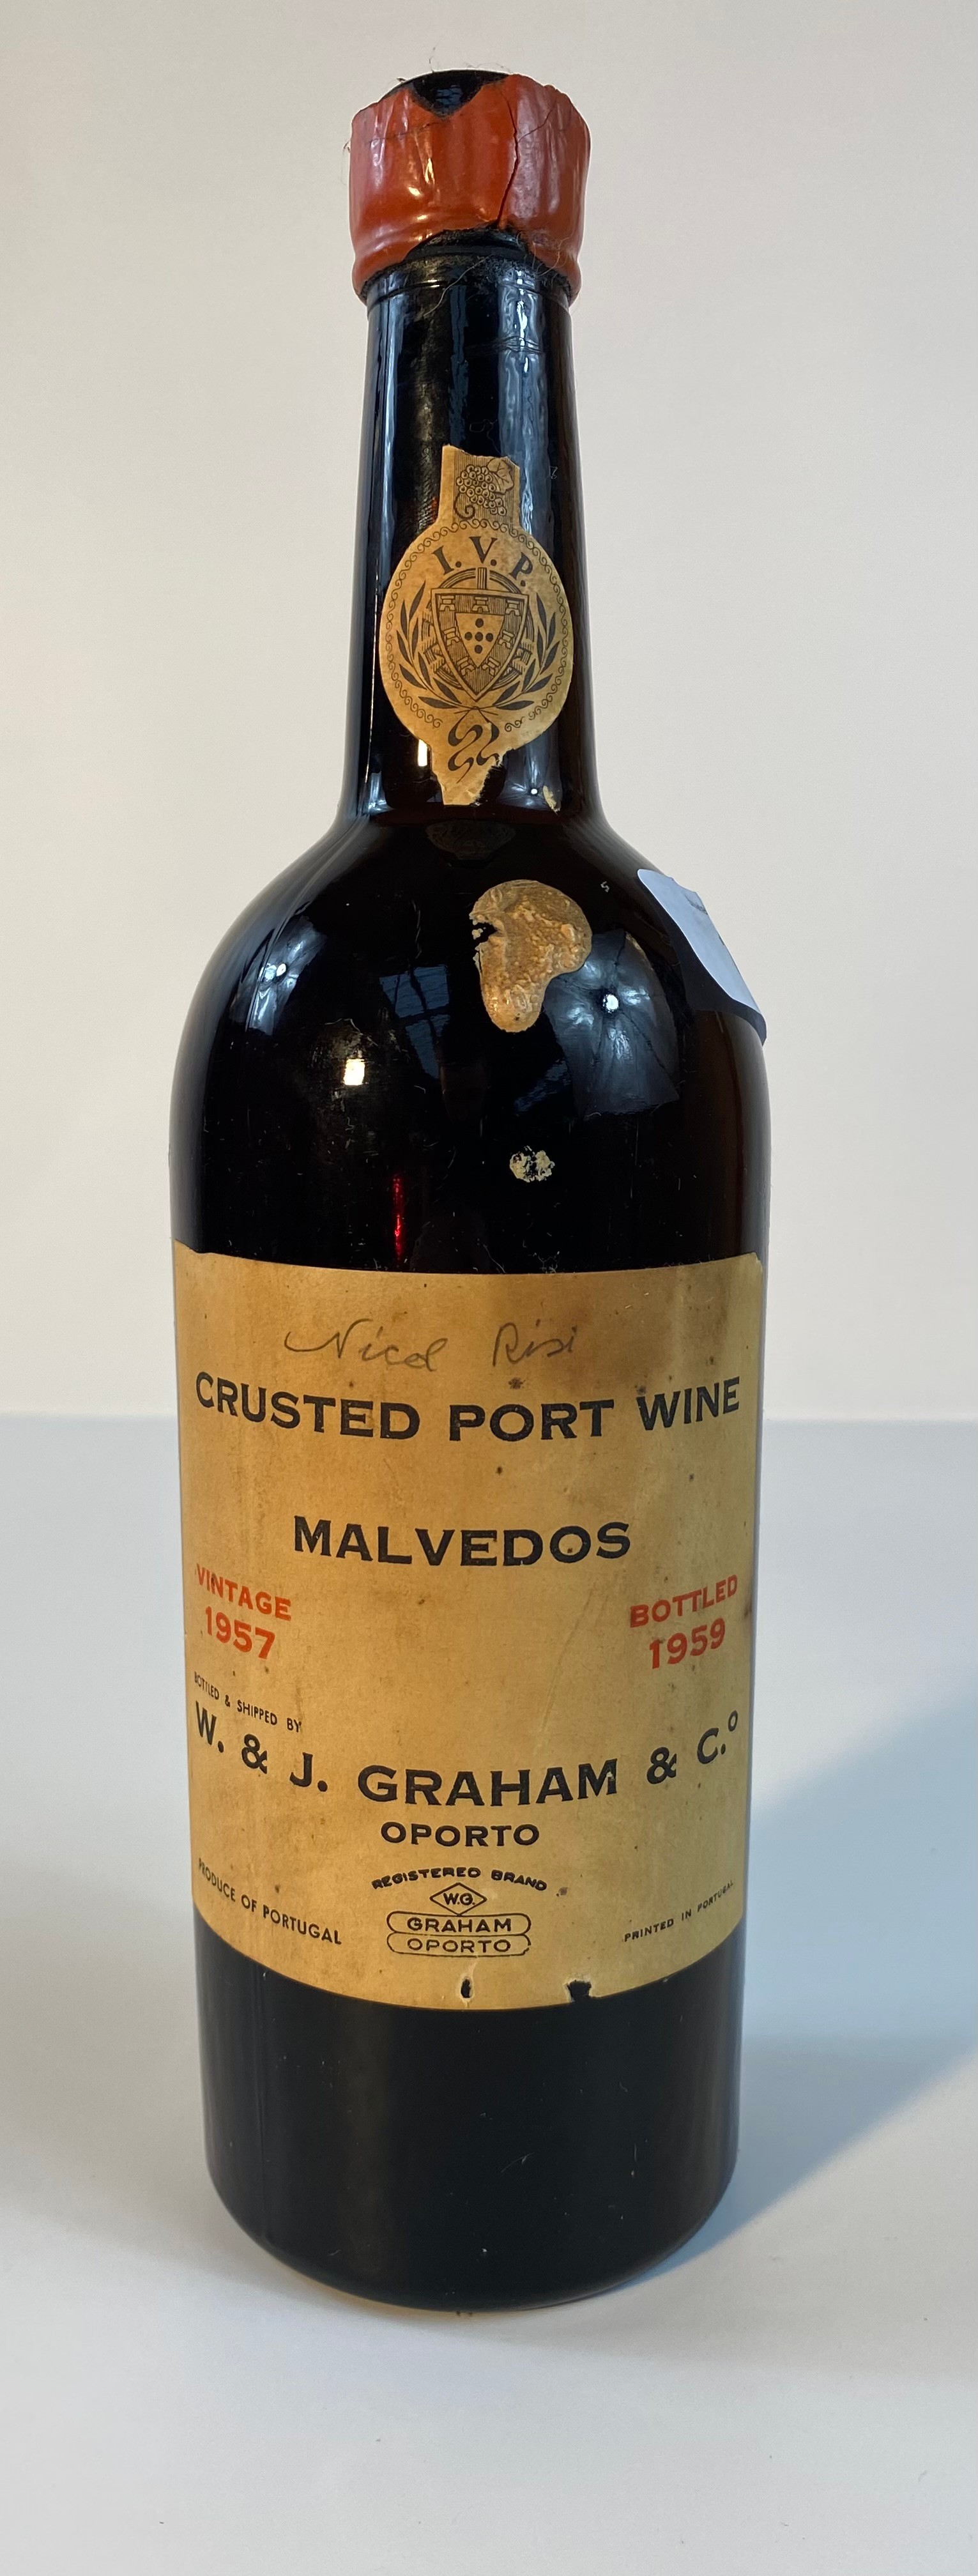 W & J Graham & co crusted port wine dated 1957-1959